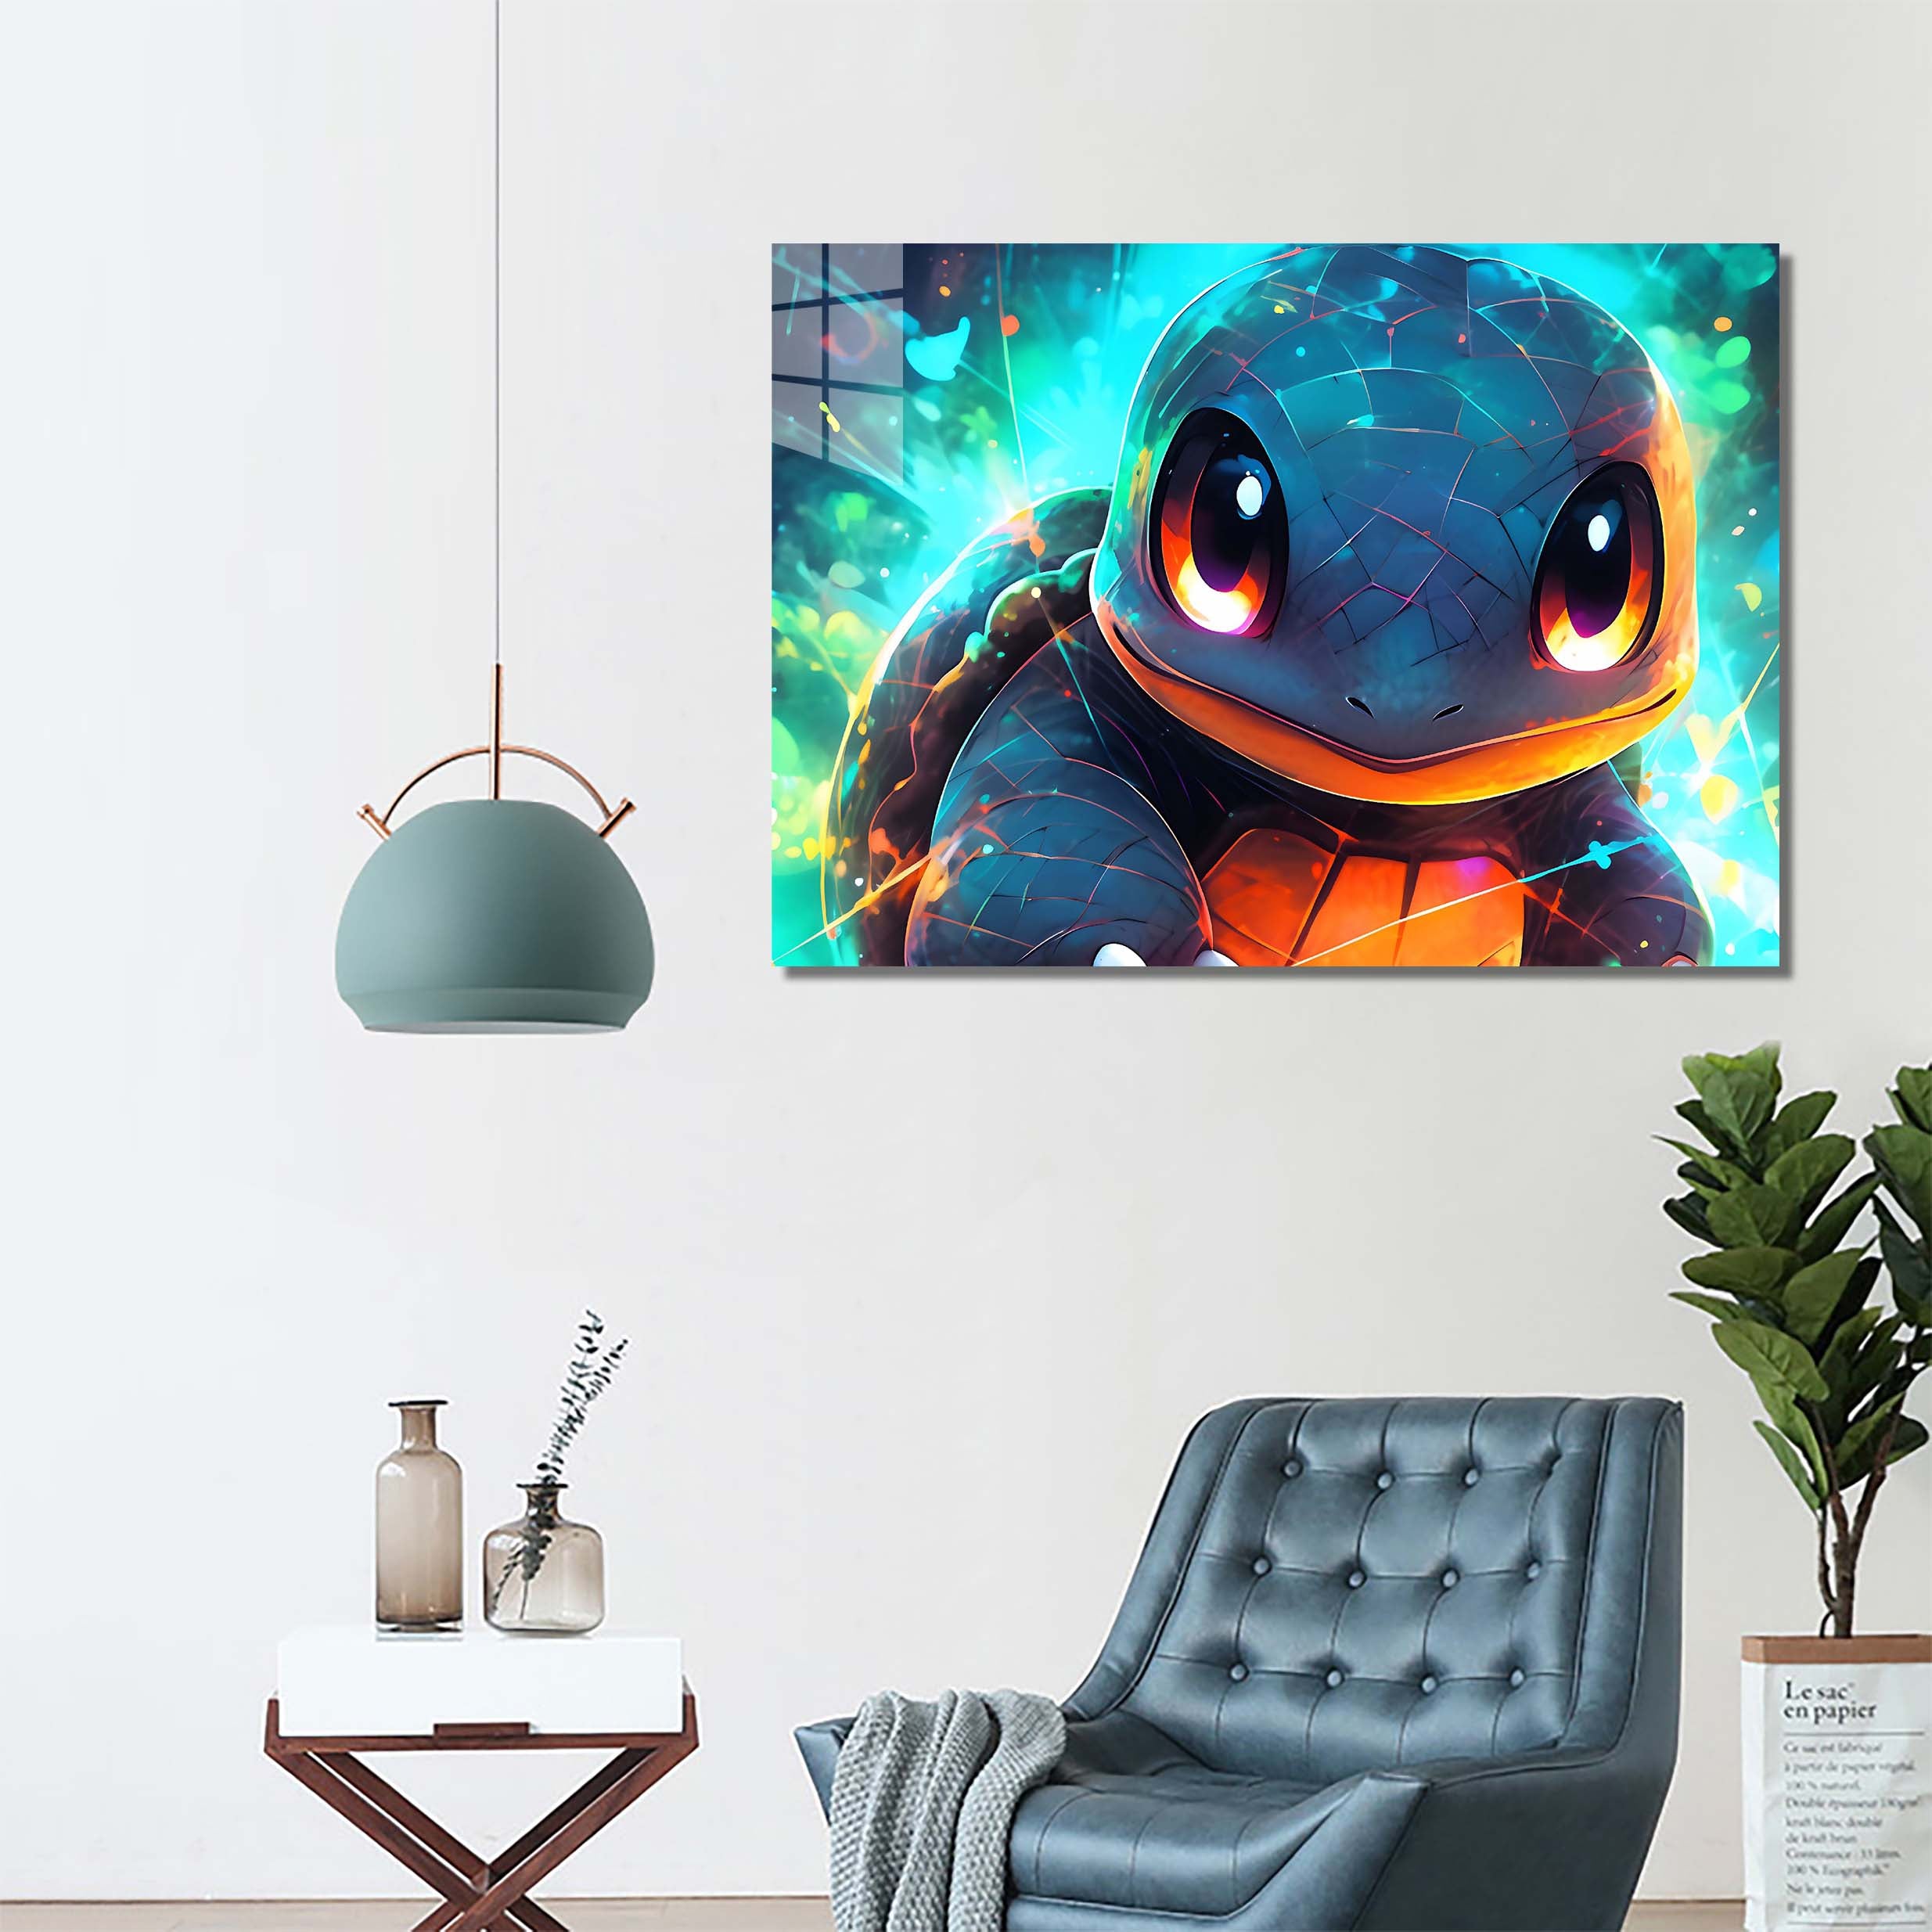 Squirtle horizontal attraction-designed by @Vid_M@tion